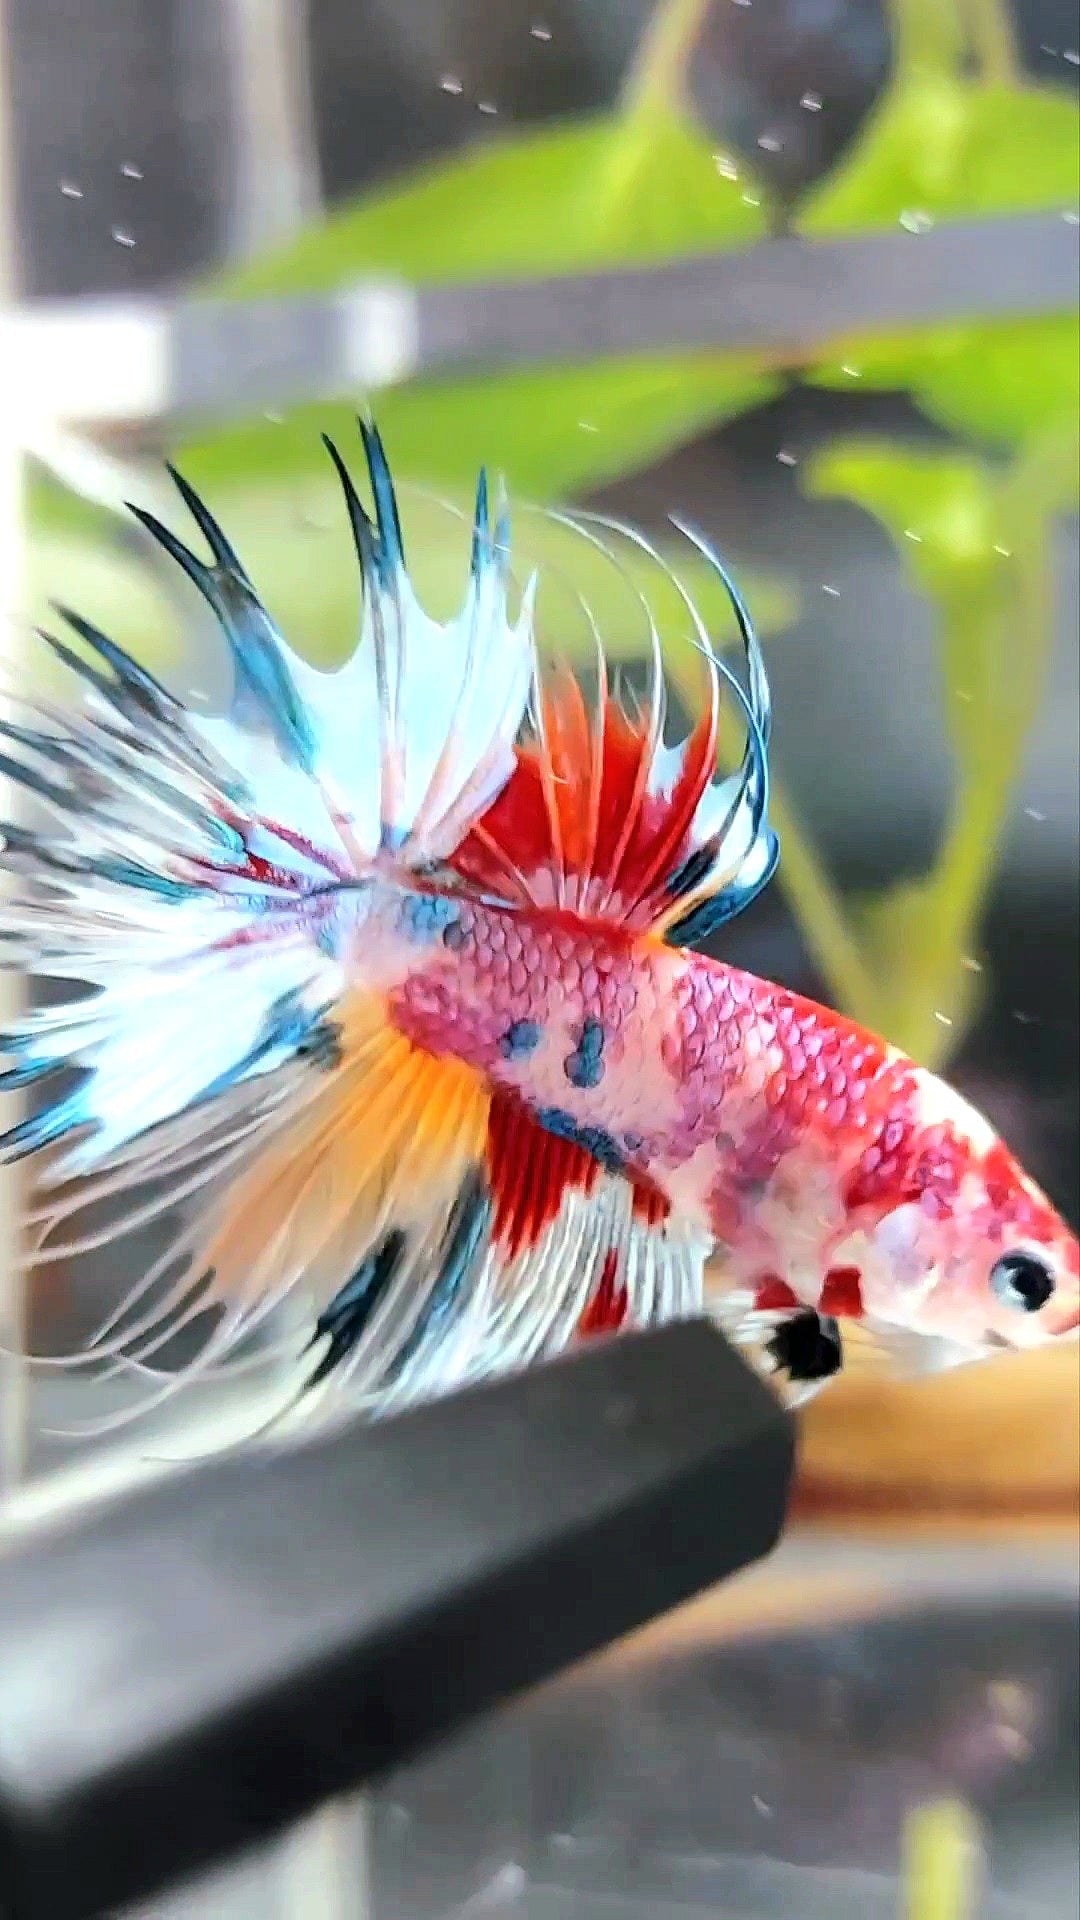 CROWNTAIL CANDY RAINBOW MULTICOLOR RARE BETTA FISH